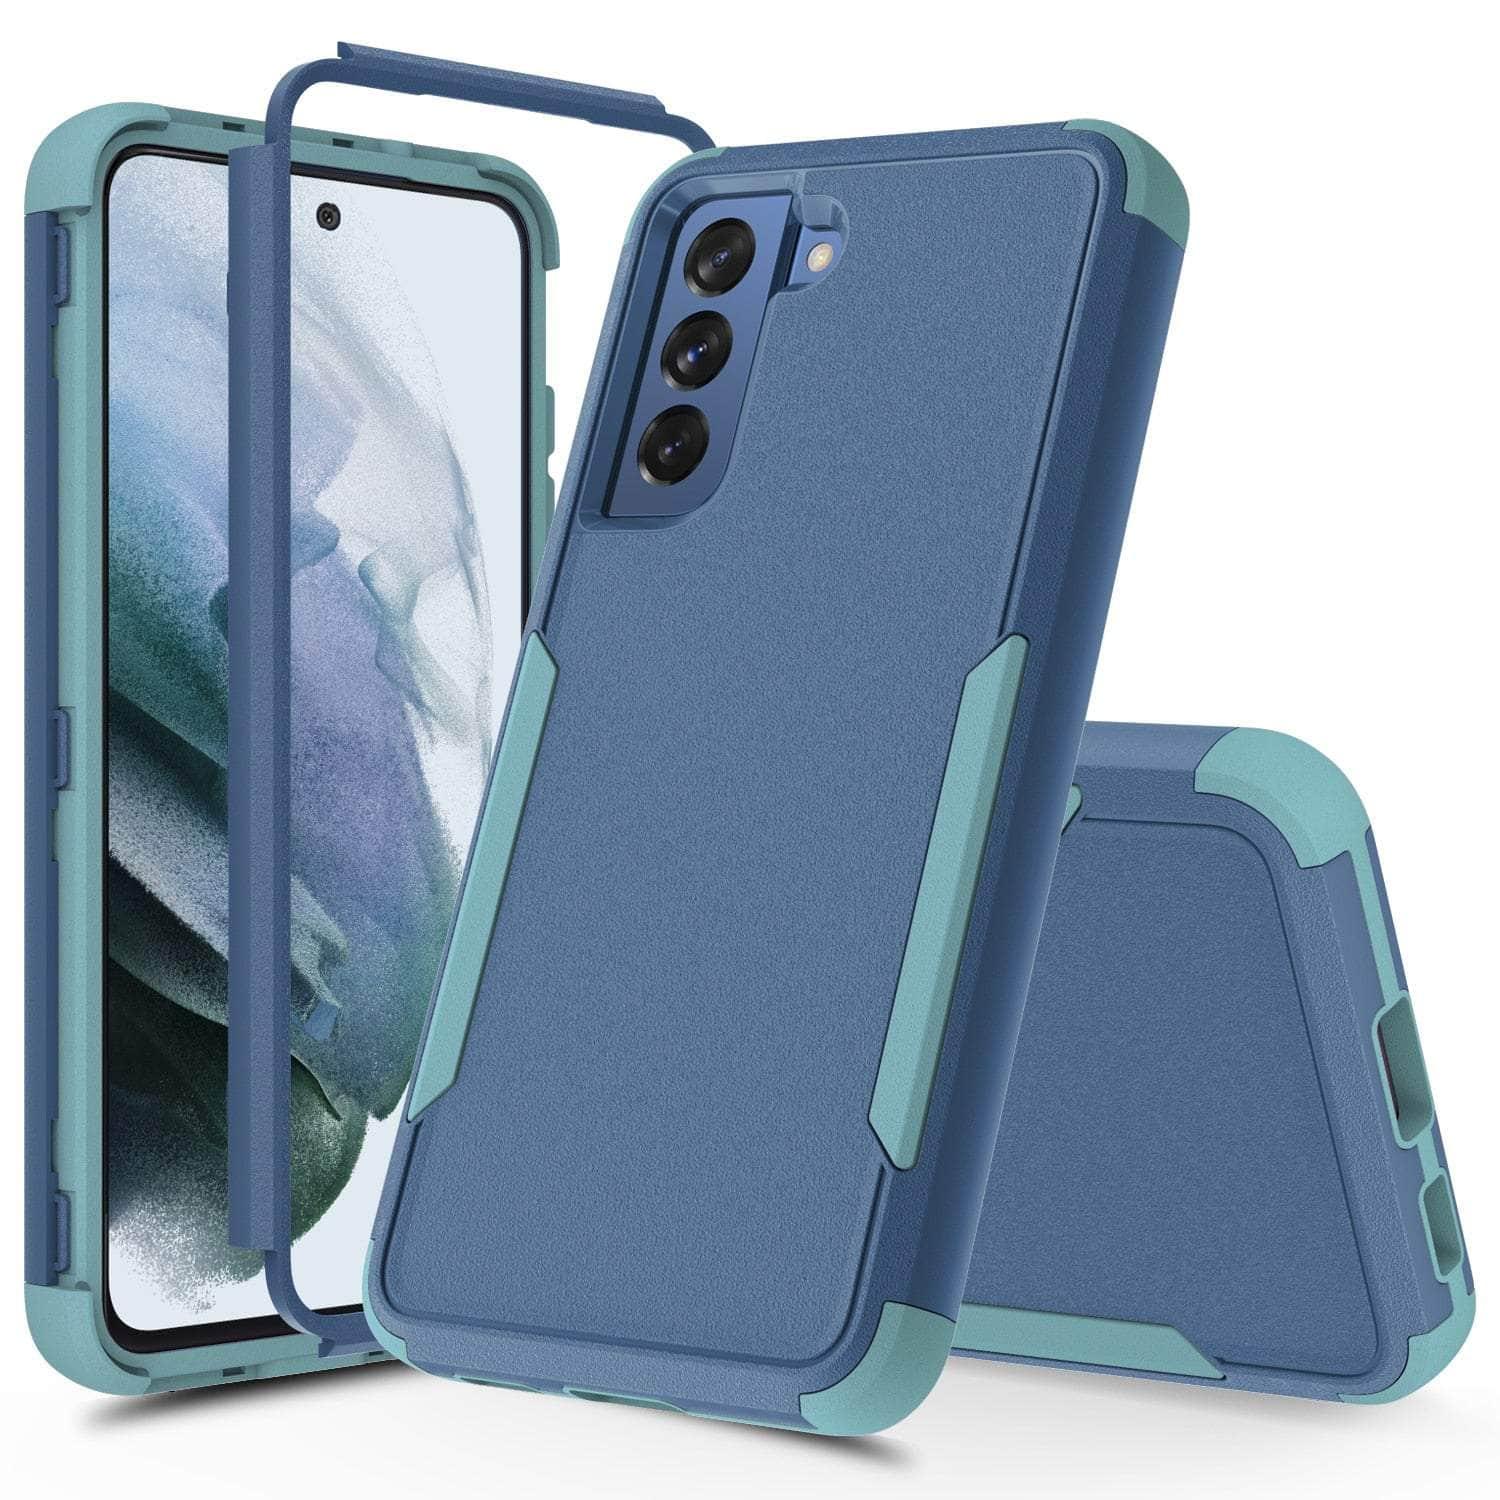 CaseBuddy Australia Casebuddy 3 LayerGalaxy S22 Ultra Armor Shockproof Front Protection Bumpers